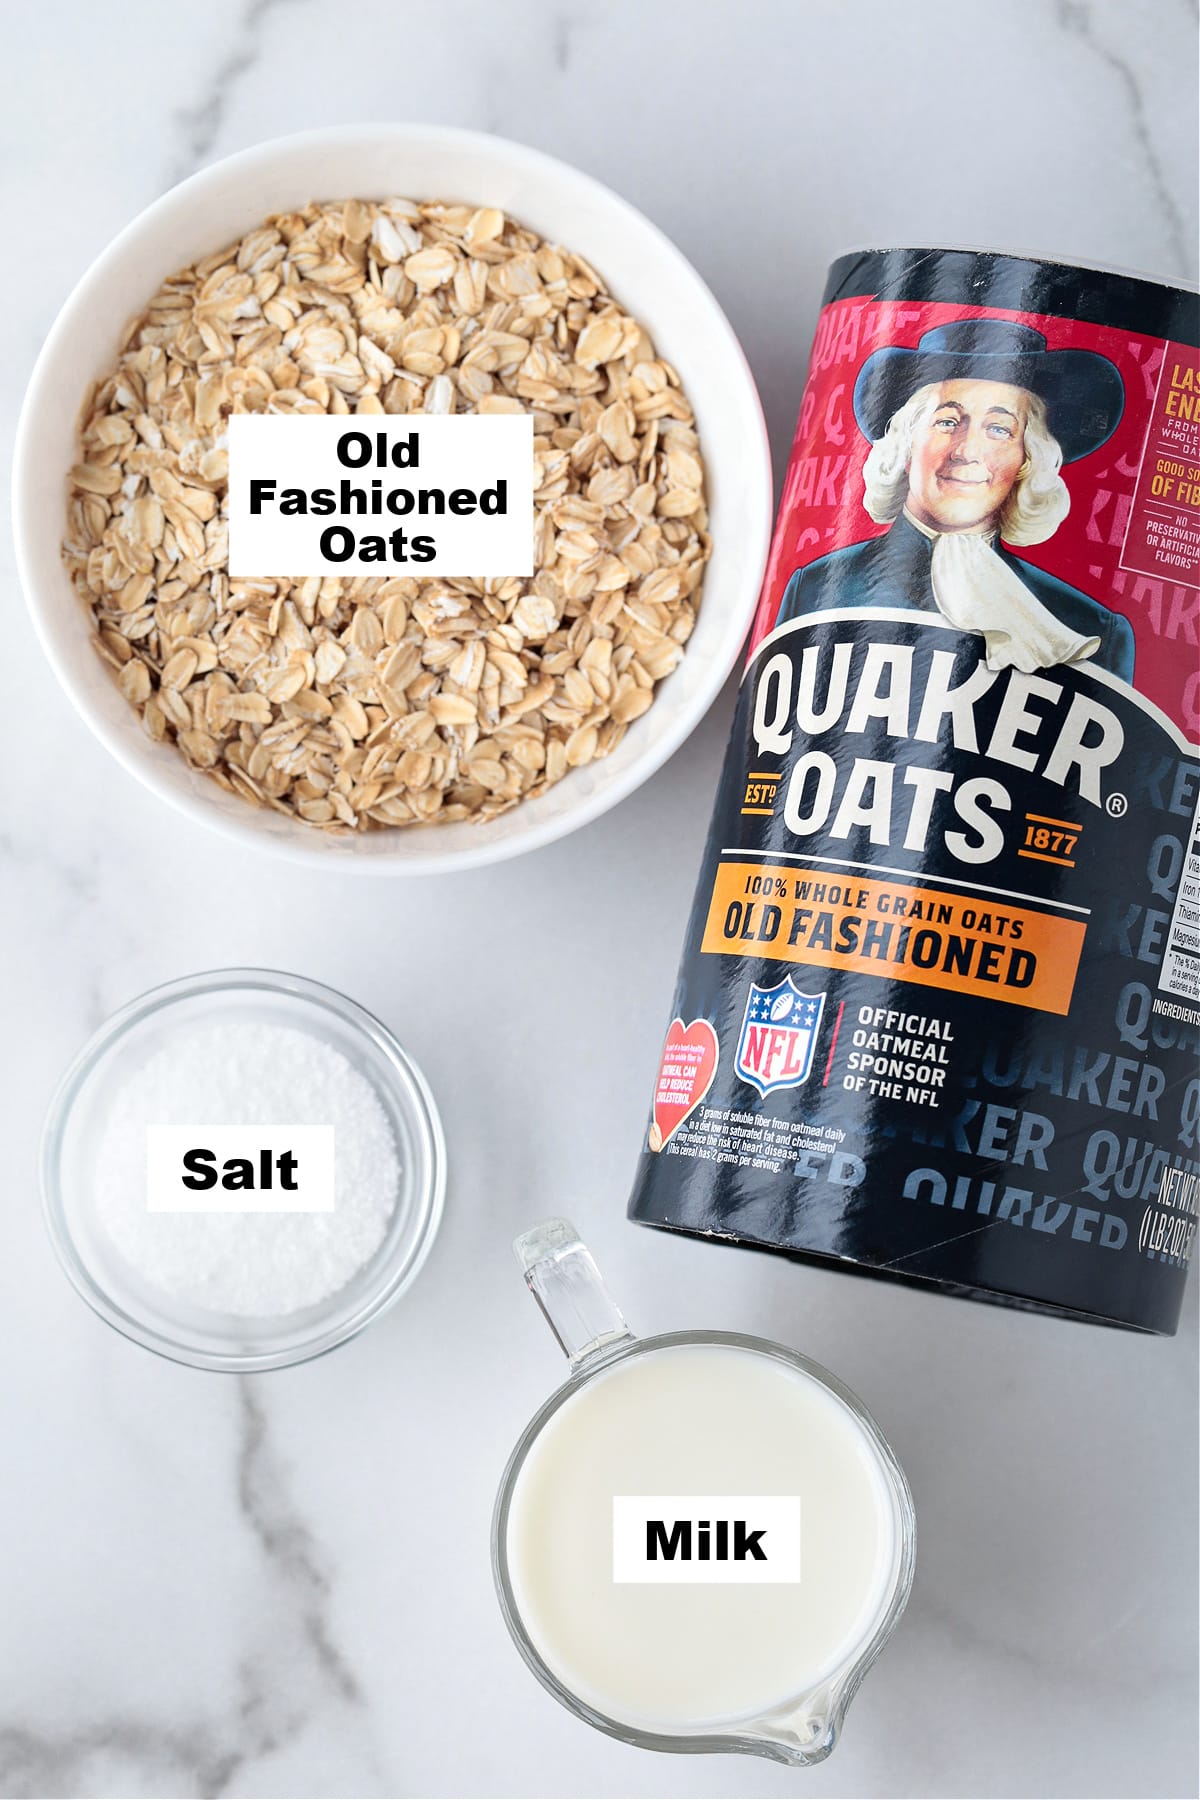 ingredients for making oatmeal in the microwave